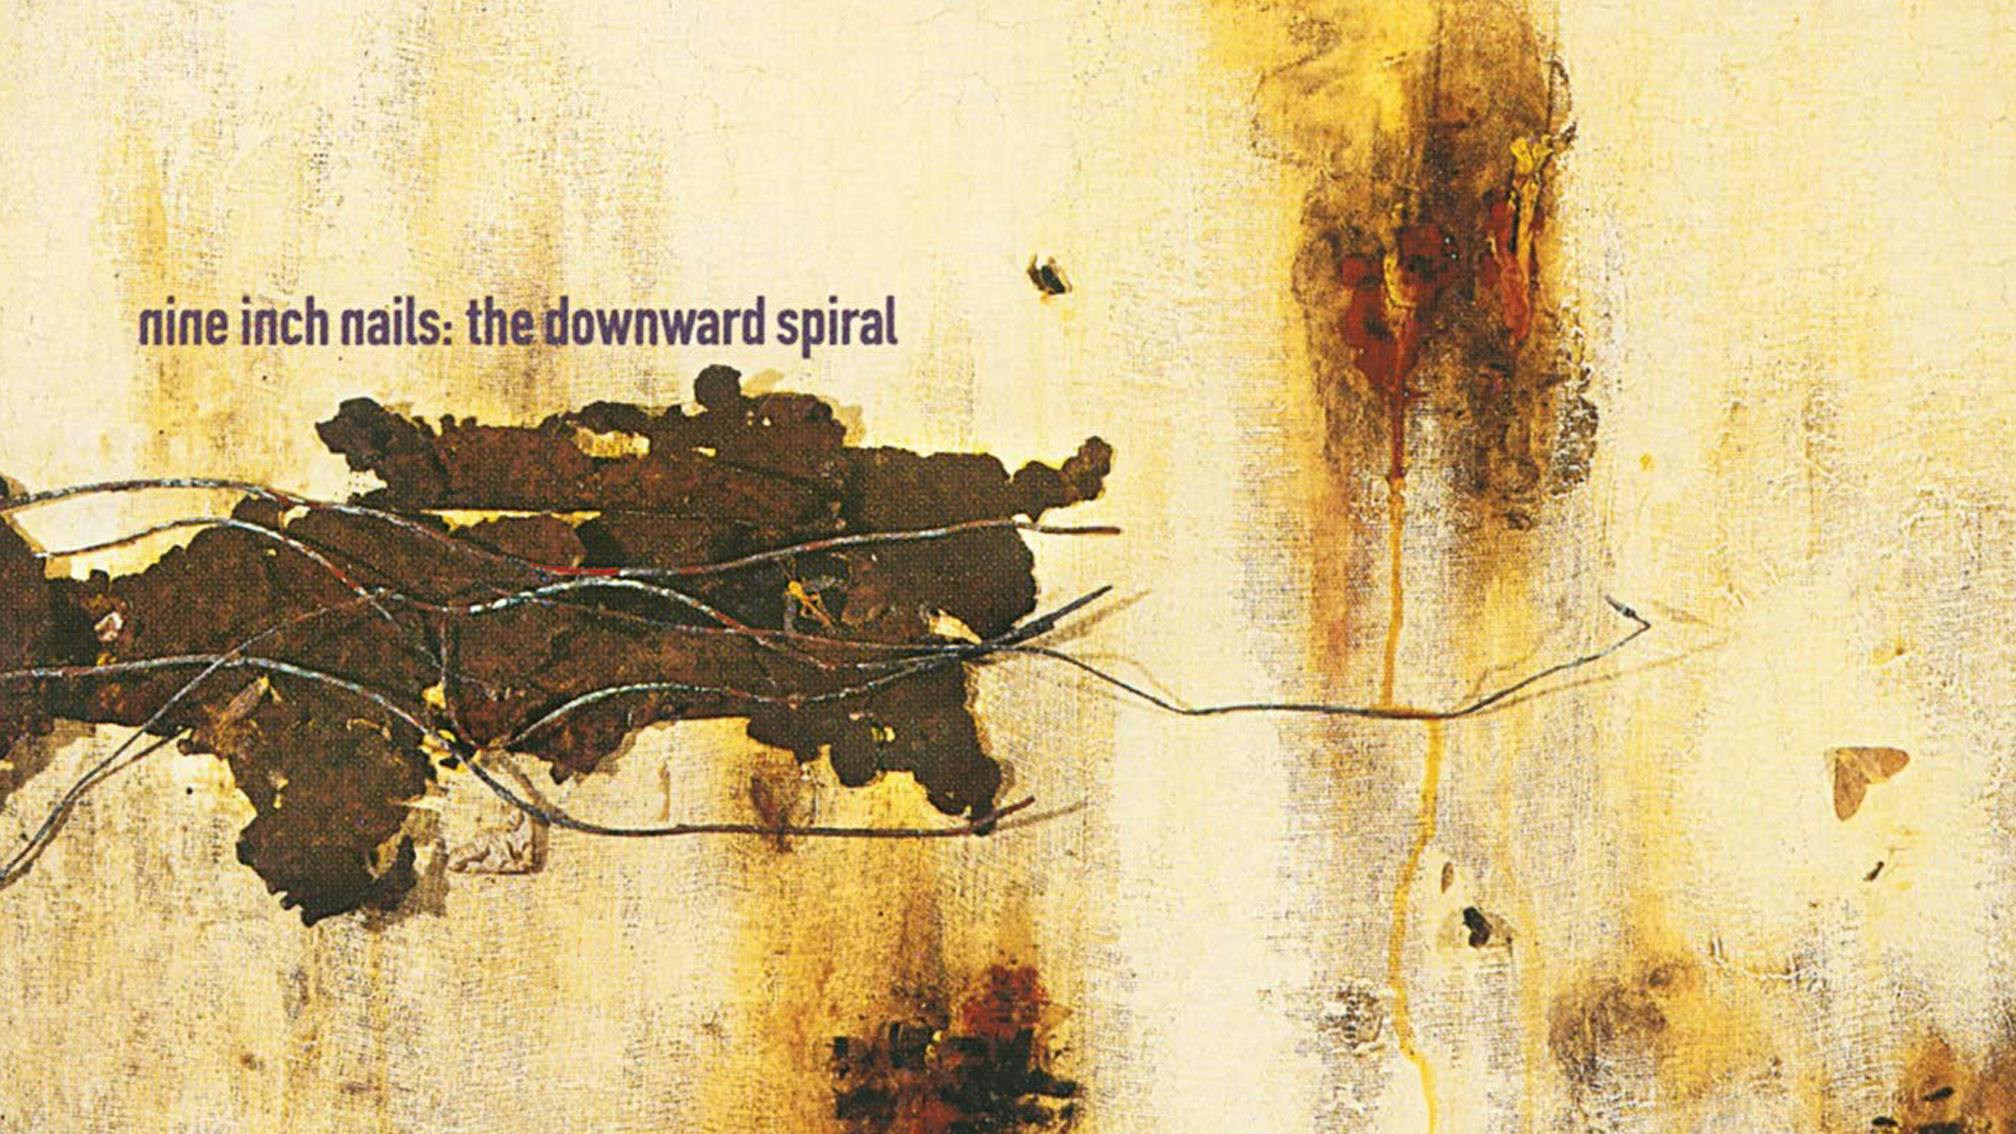 The Downward Spiral: The darkness and despair behind Nine Inch Nails’ masterpiece